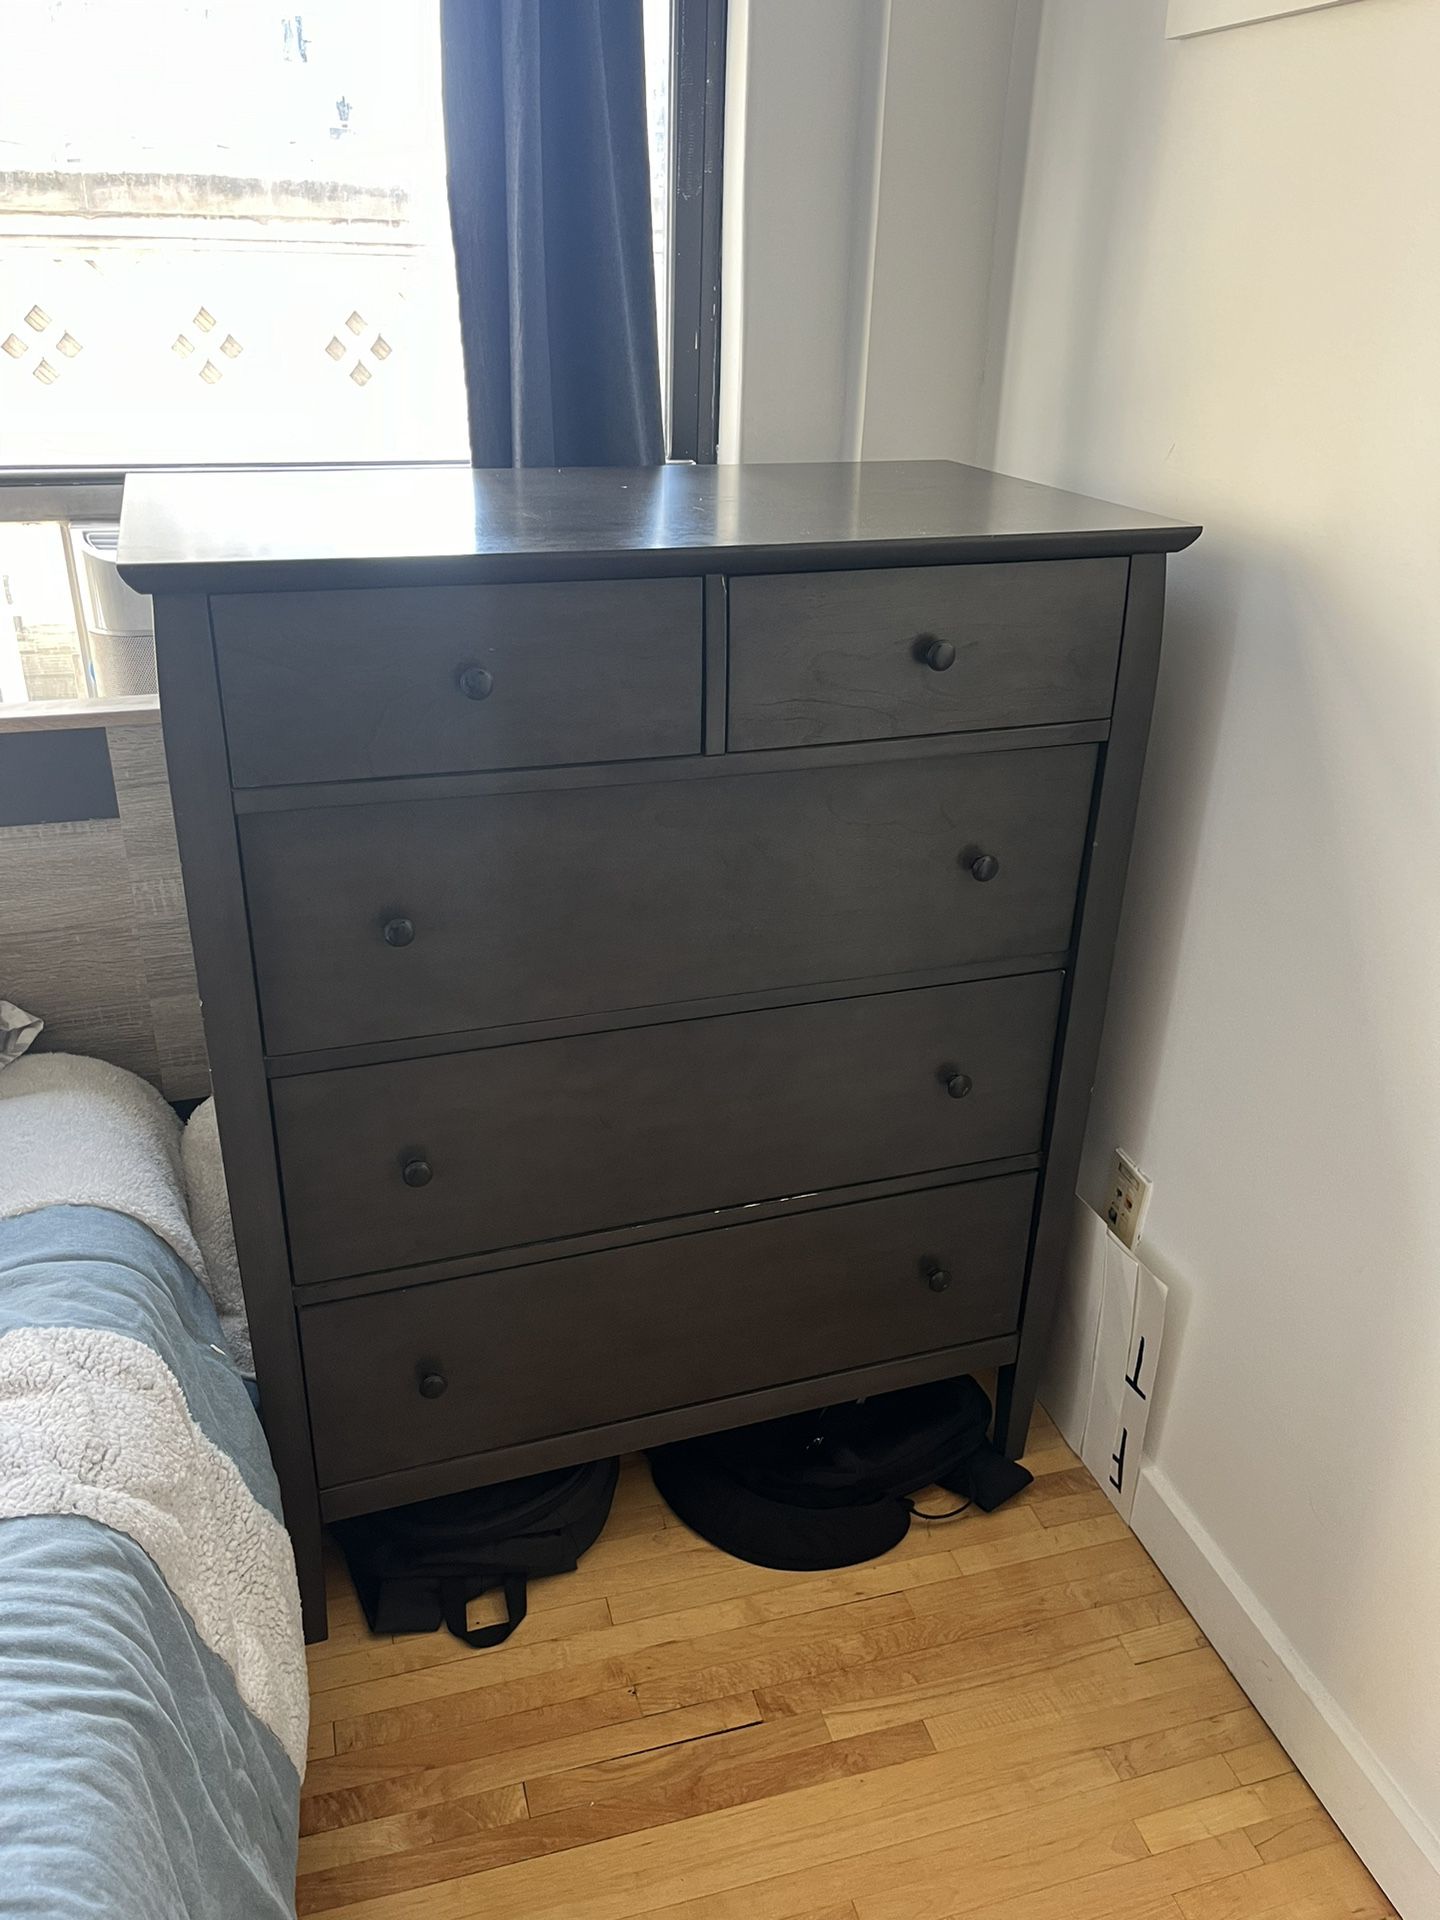 Crate and Barrel Dresser - Great Condition